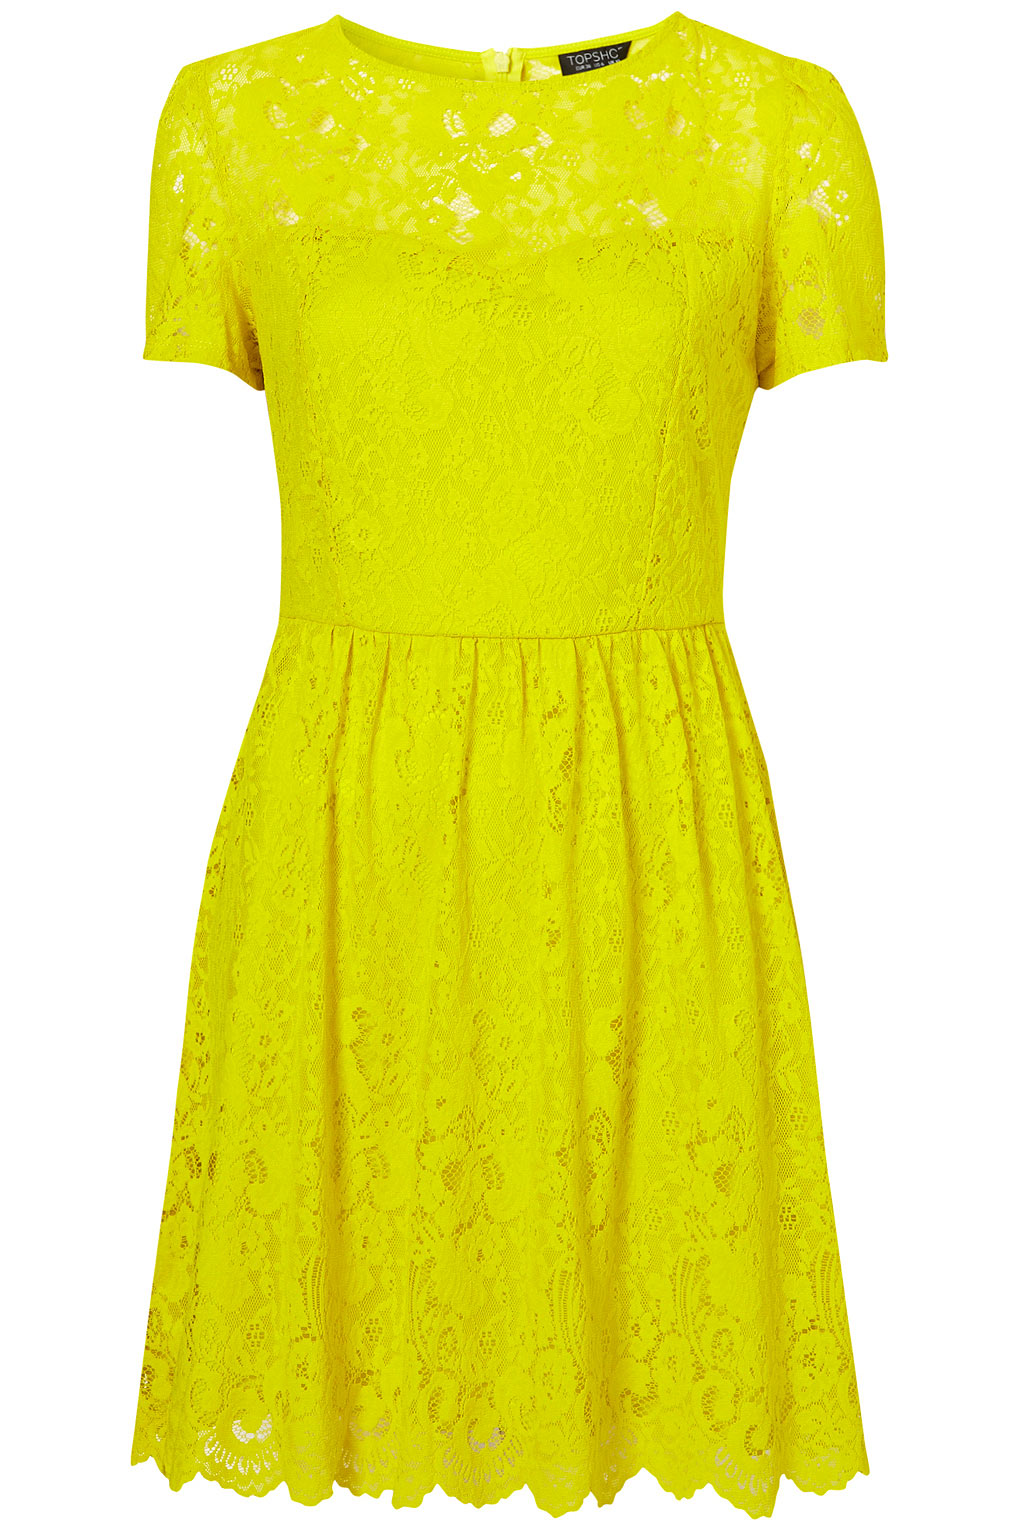 Neon Lace Flippy Dress also from Topshop but not in the sale â€“ boo!